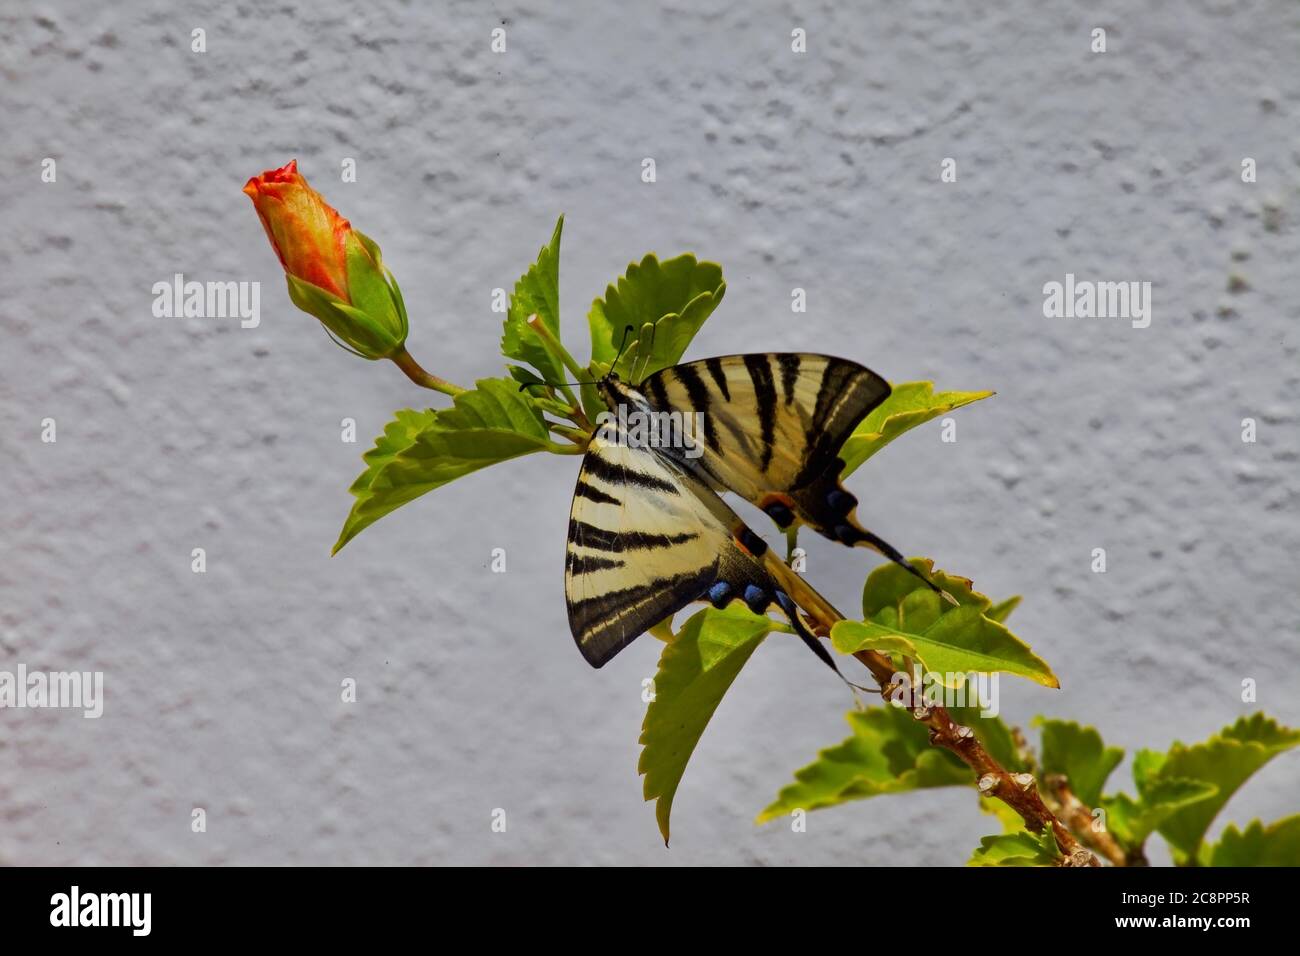 Swallowtail Butterfly . Whitewashed wall in the background. Striped   tiger butterfly on Hibiscus plant. Stock Image. Stock Photo